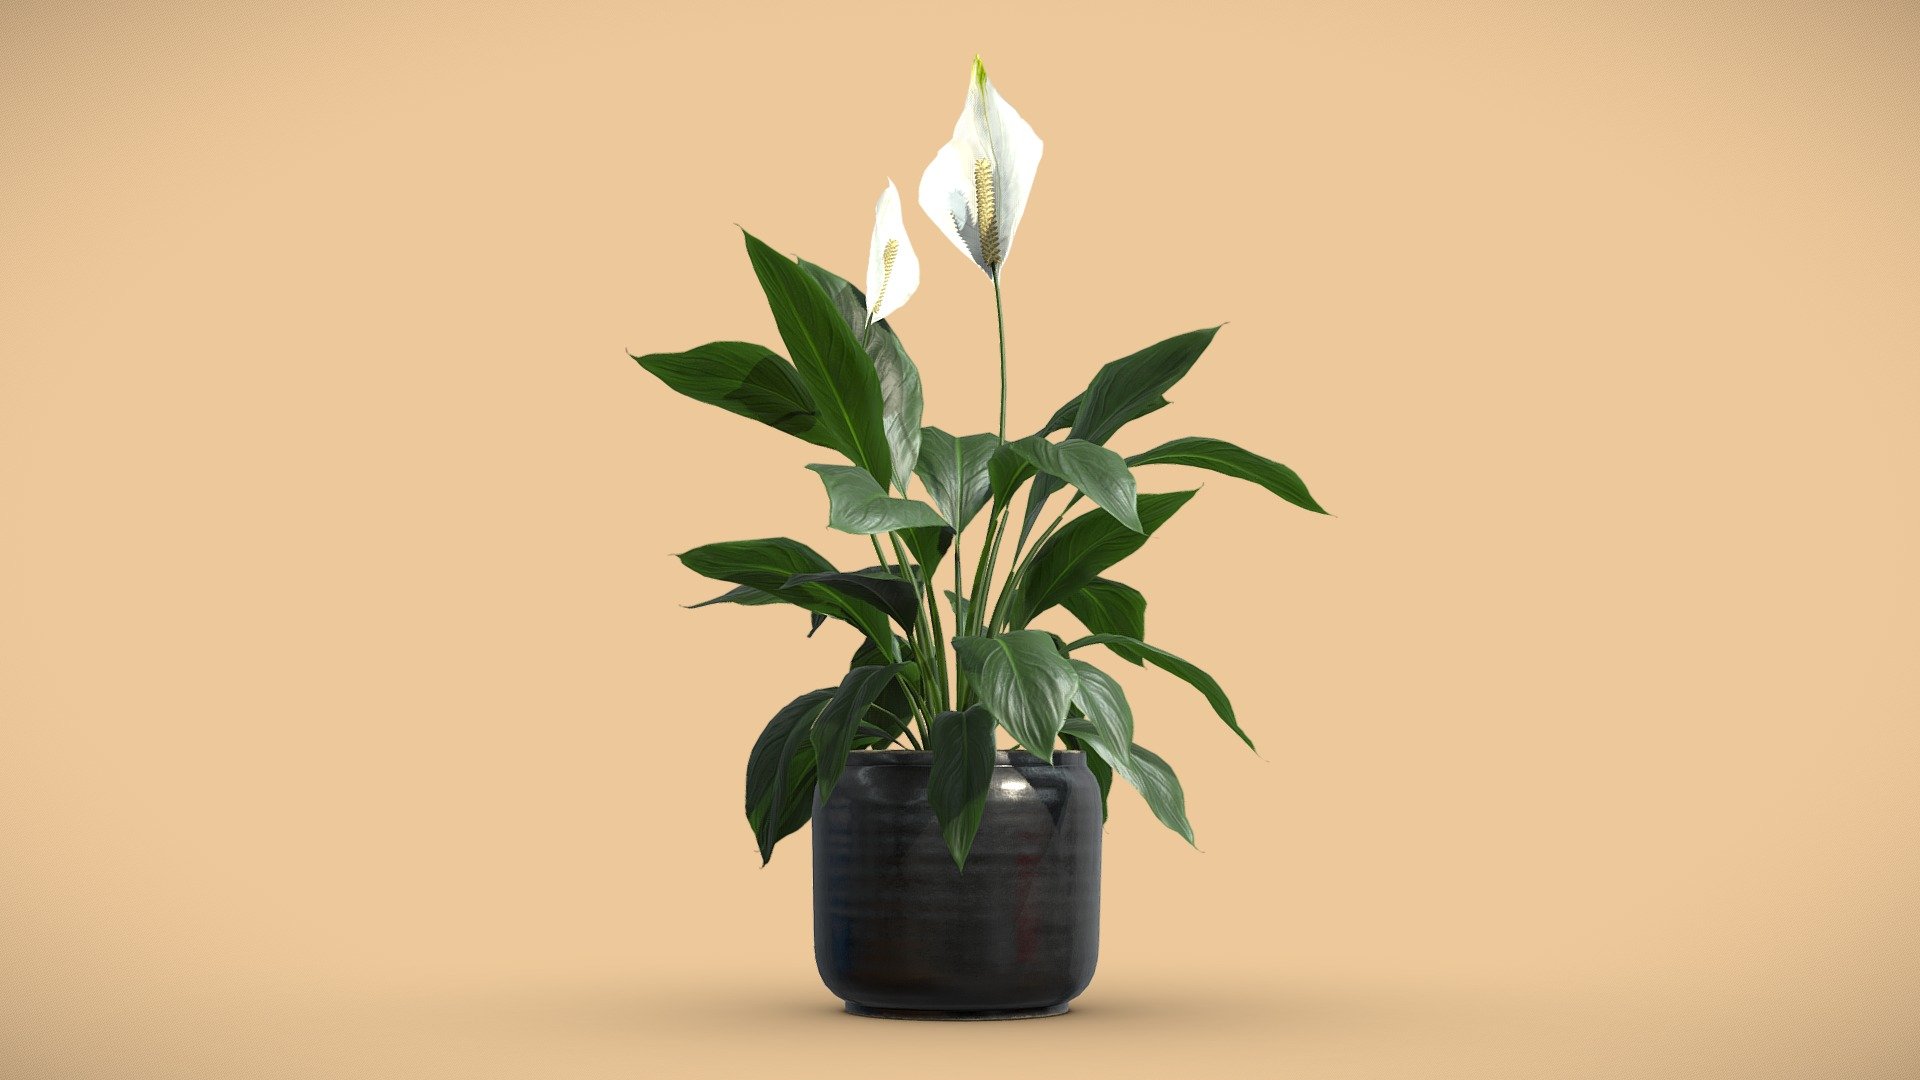 Peace Lily in Ceramic Dark Planter
Spathiphyllum is a tropical, evergreen plants in the Arum family, native to tropical Central and South America. Peace lilies, also known as closet plants, are a popular choice for offices and homes.

Model is optimized for subdivision.

4k Textures




Vertices  15 487

Polygons  13 463

Triangles 26 572
 - Peace Lily in Ceramic Dark Planter - Buy Royalty Free 3D model by AllQuad 3d model